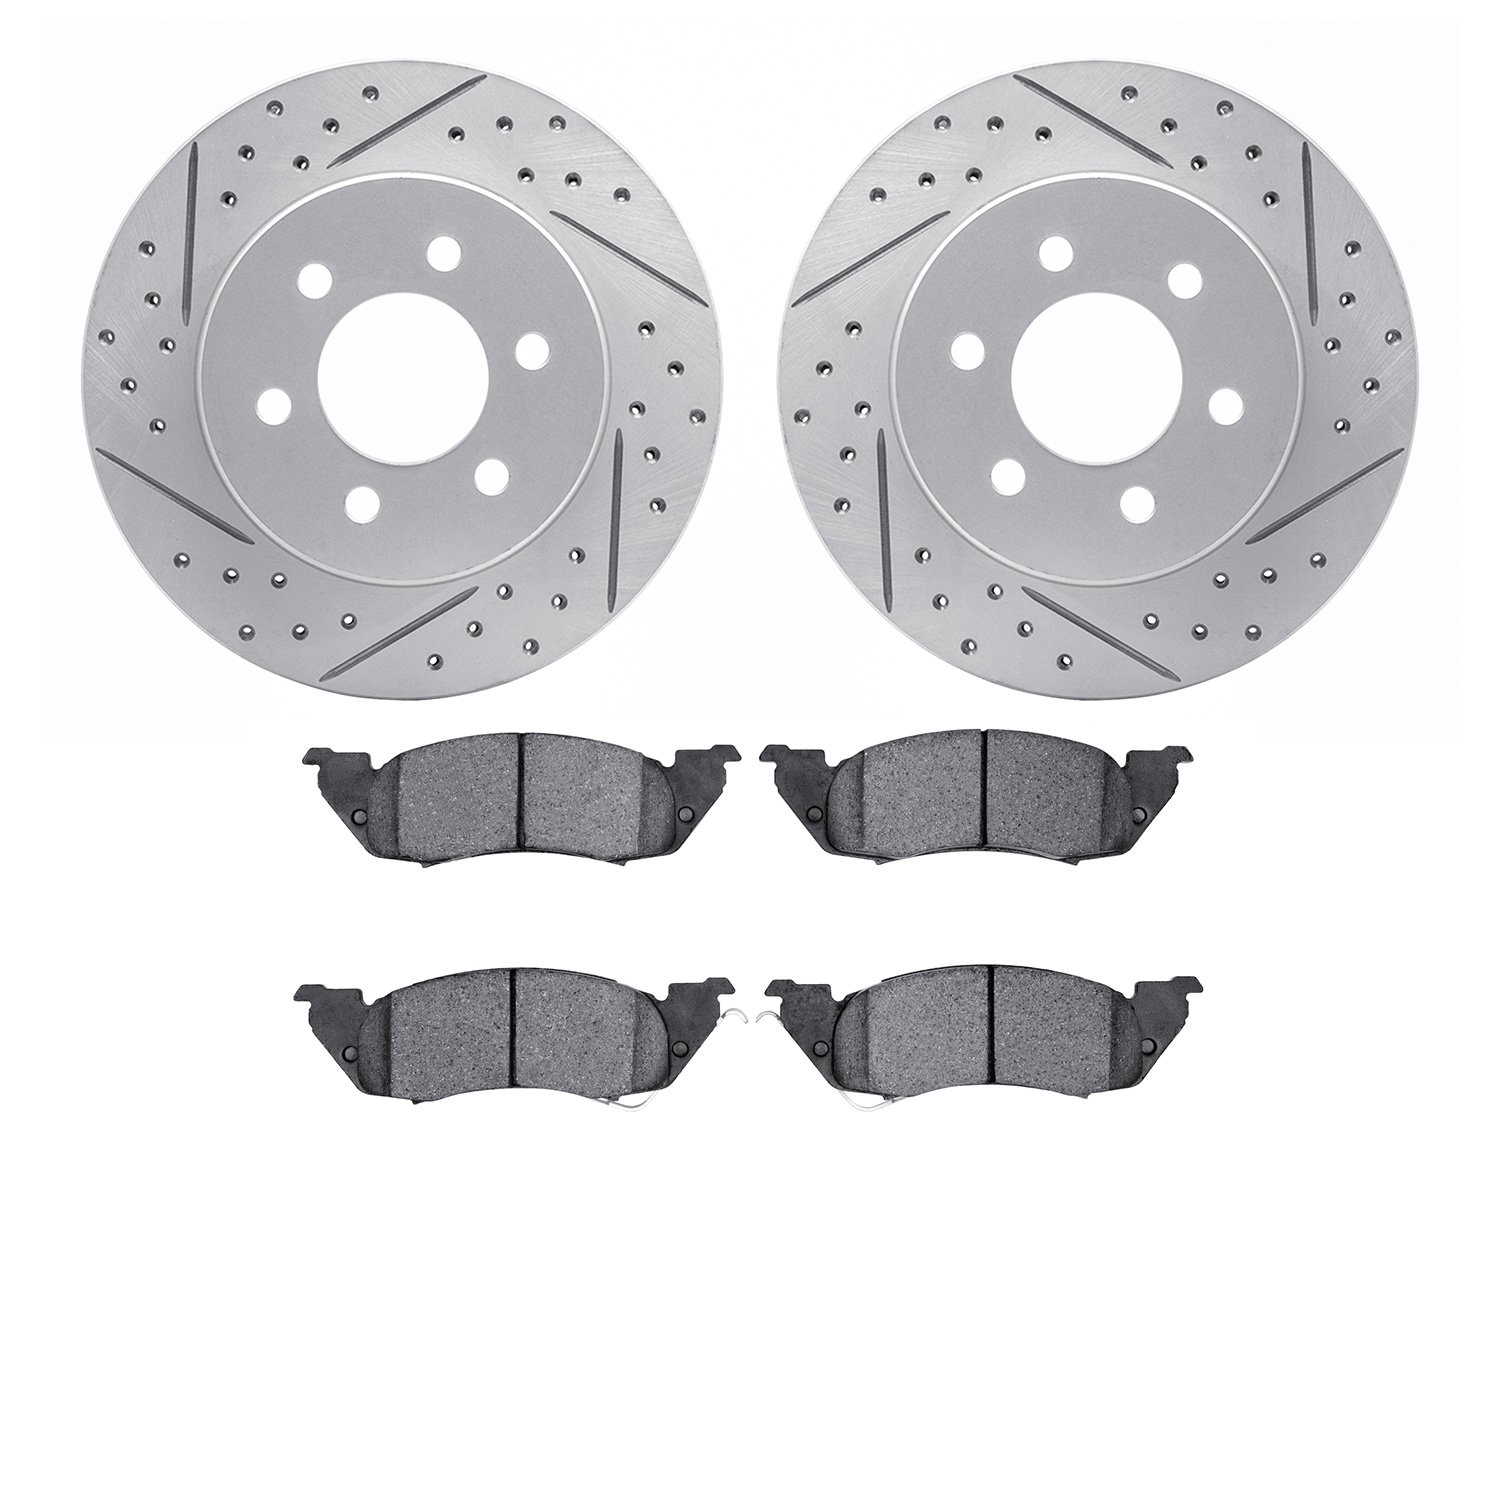 2202-40045 Geoperformance Drilled/Slotted Rotors w/Heavy-Duty Pads Kit, 1997-1998 Mopar, Position: Front